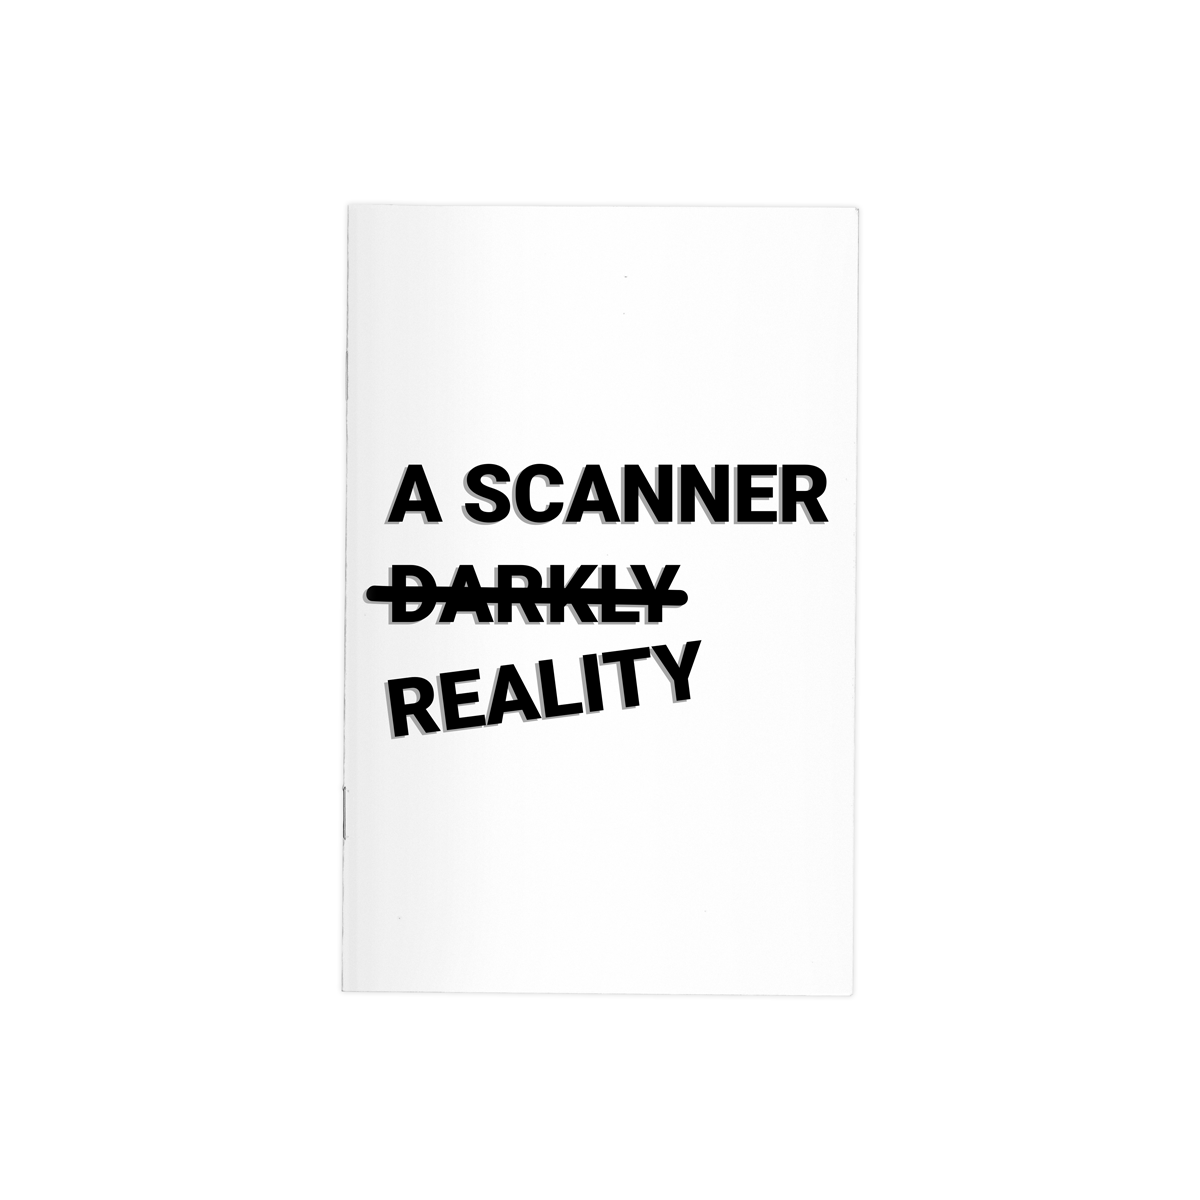 A Scanner Reality - 16 Page 8.5 x 5.5 in. Saddle-Stitched Booklet.